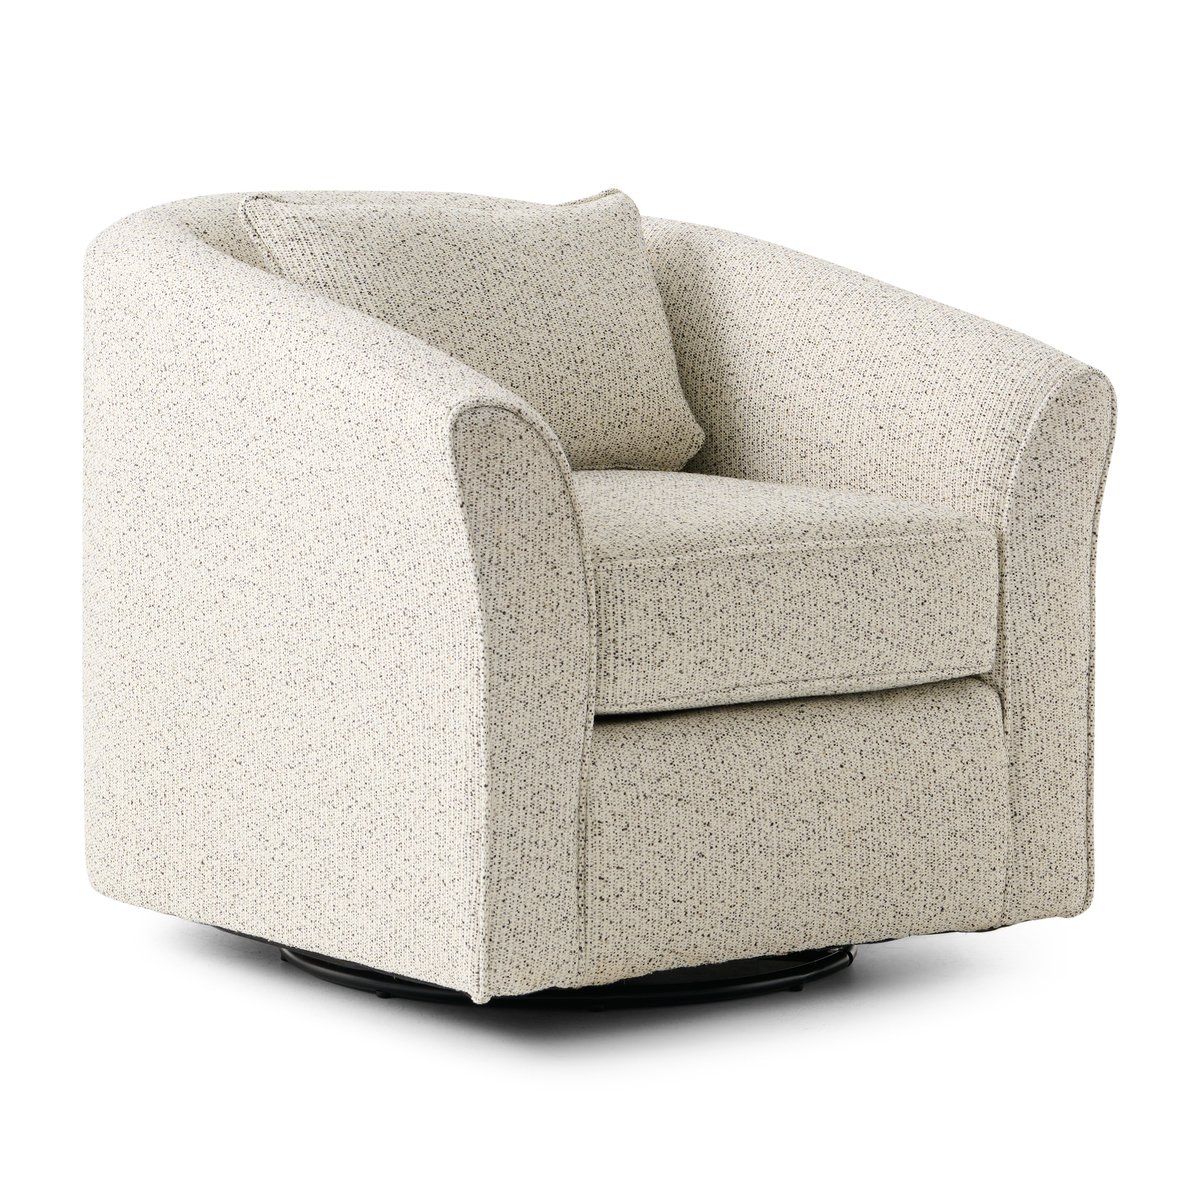 Chit Chat Domino Swivel Chair